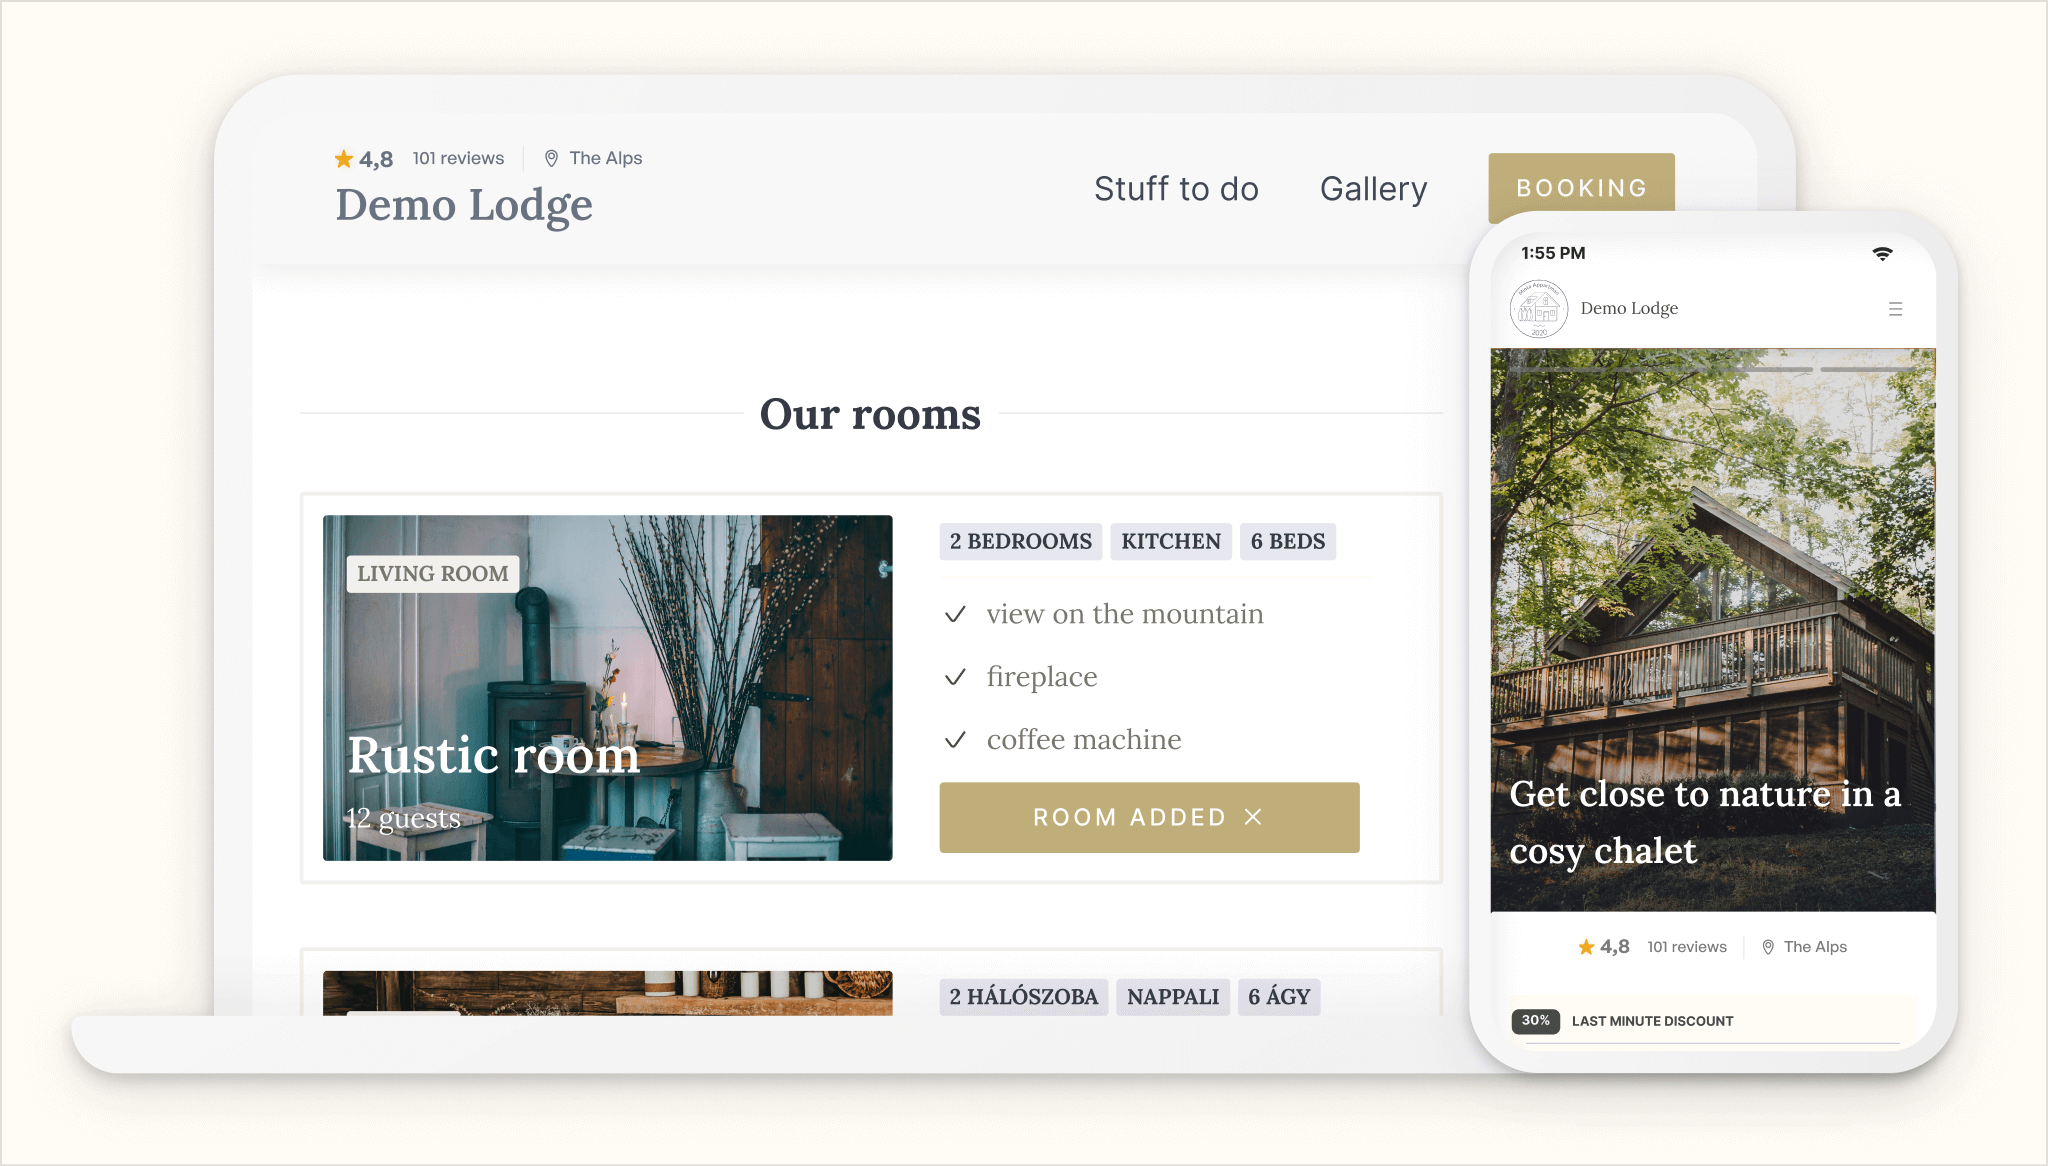 Premium booking website templates for Airbnbs and small vacation rentals